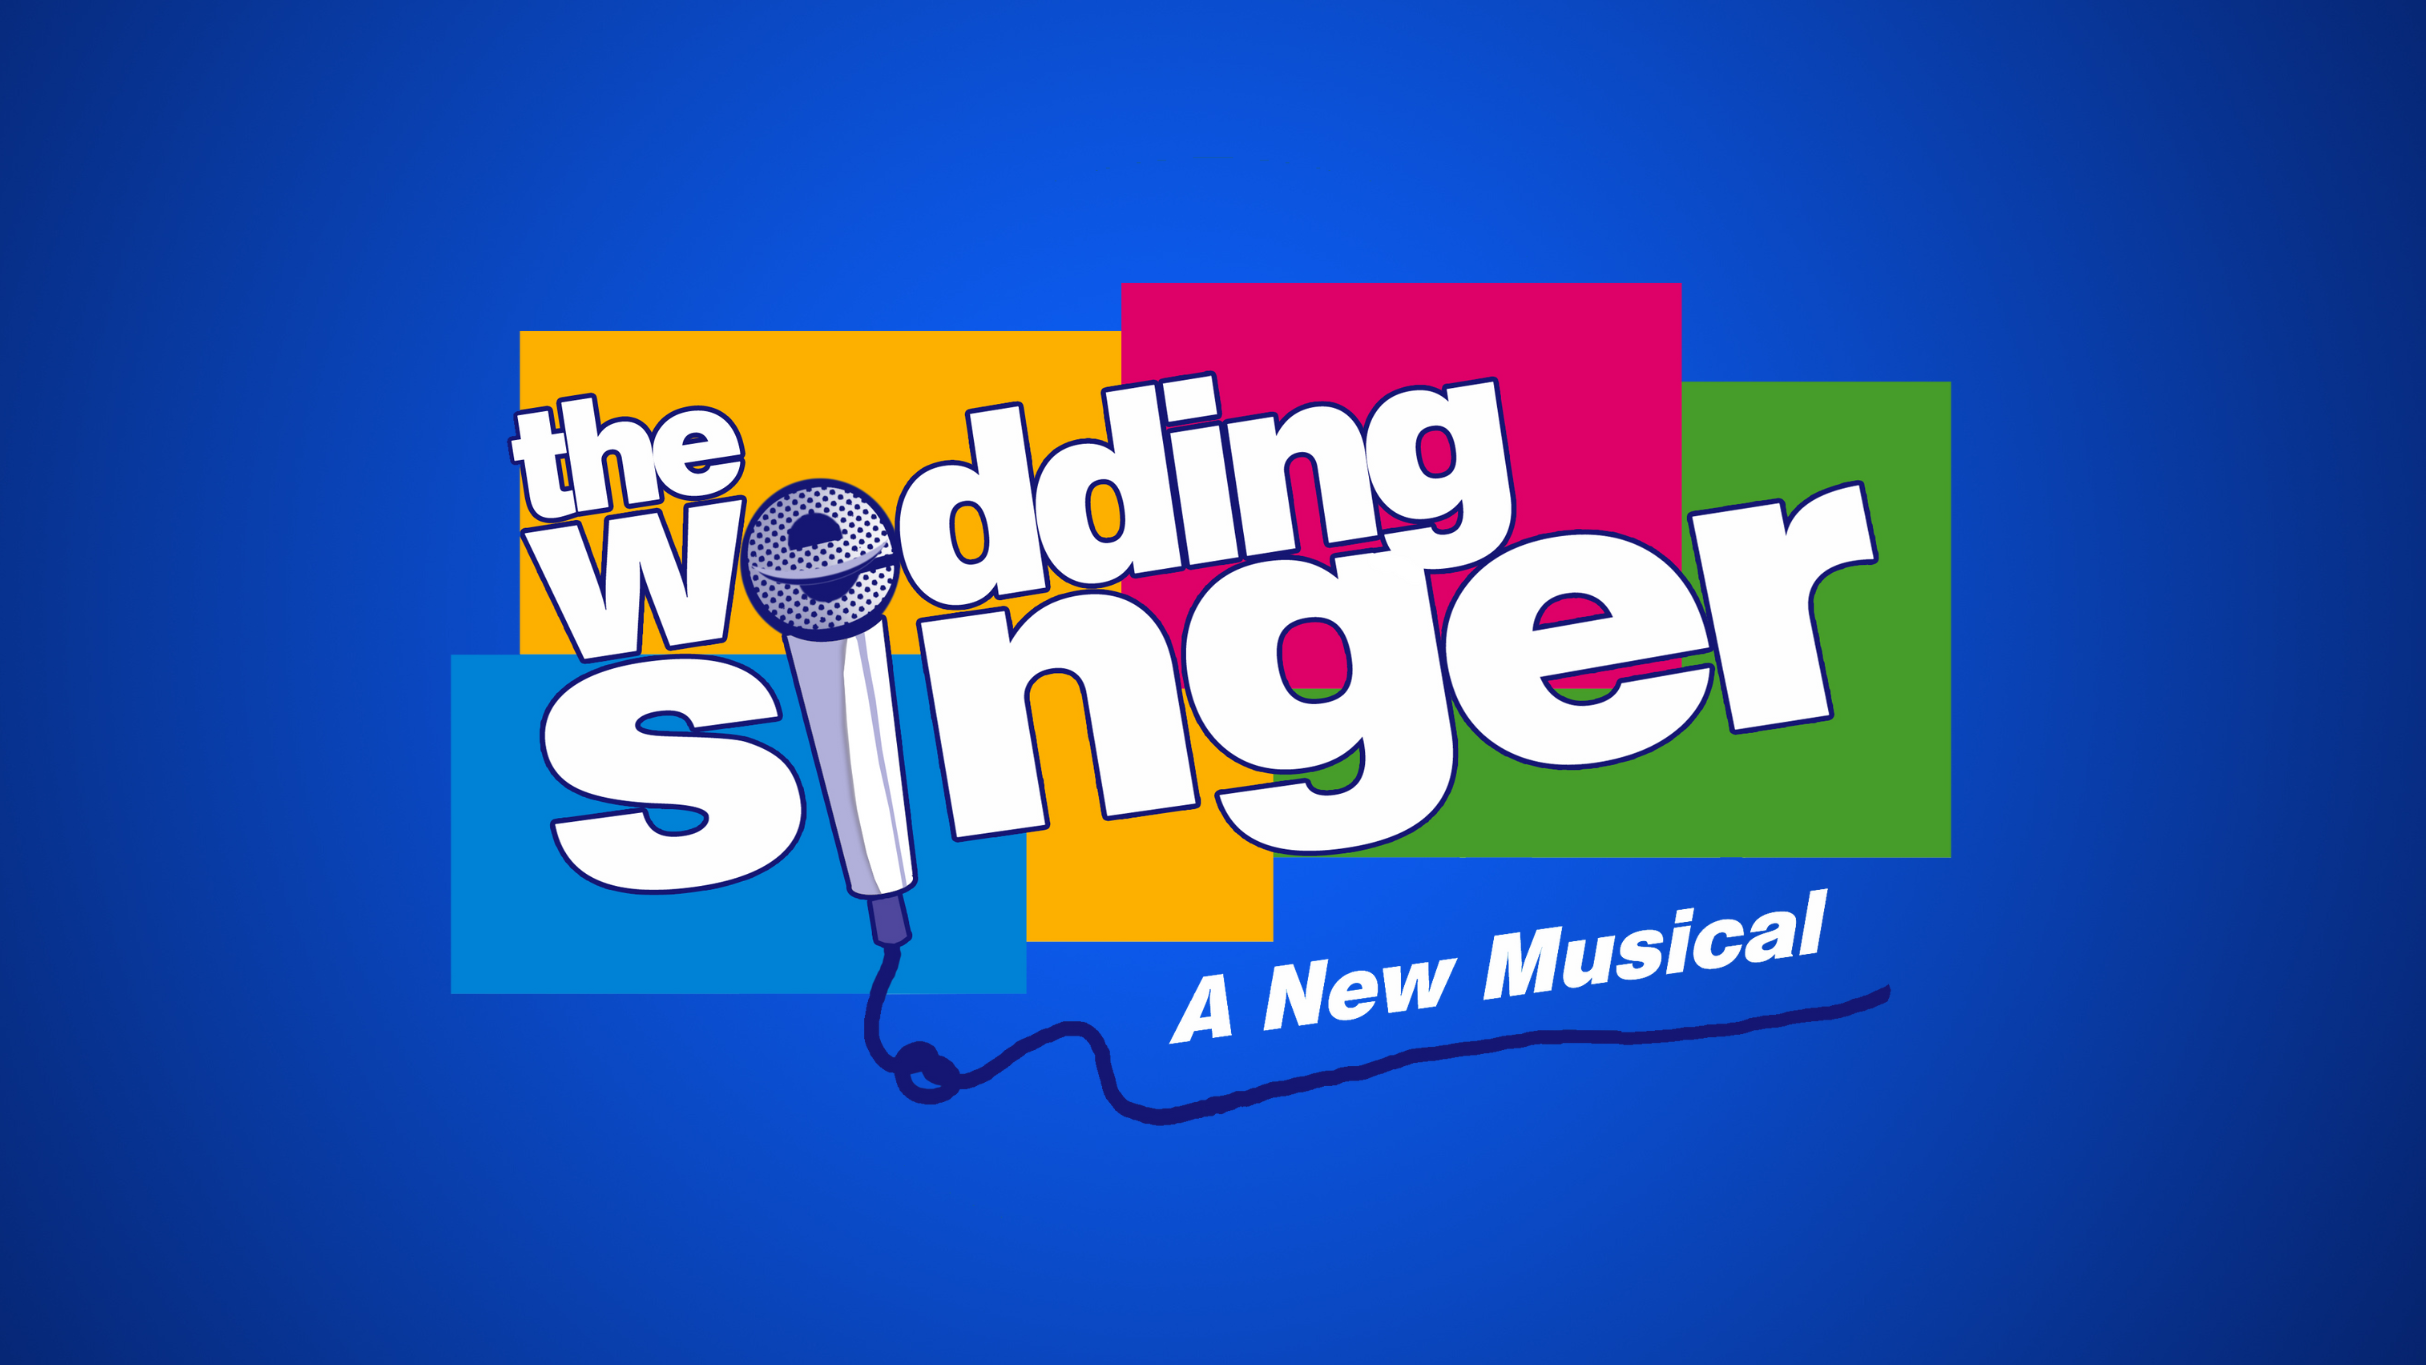 The Wedding Singer in Northbridge promo photo for Exclusive presale offer code